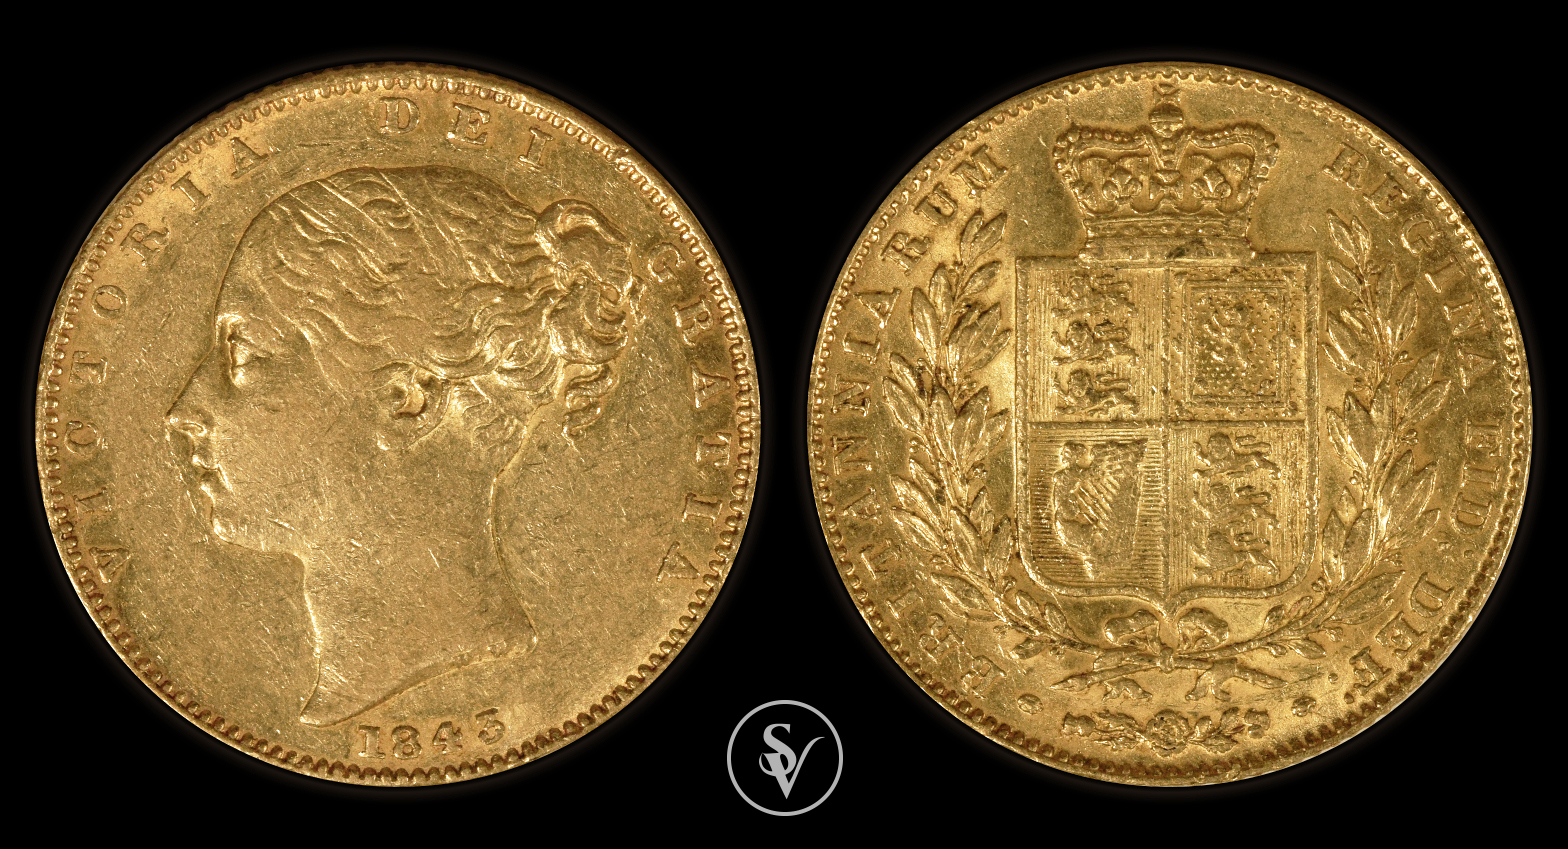 1843 Victoria gold sovereign shield - Coins and collectables